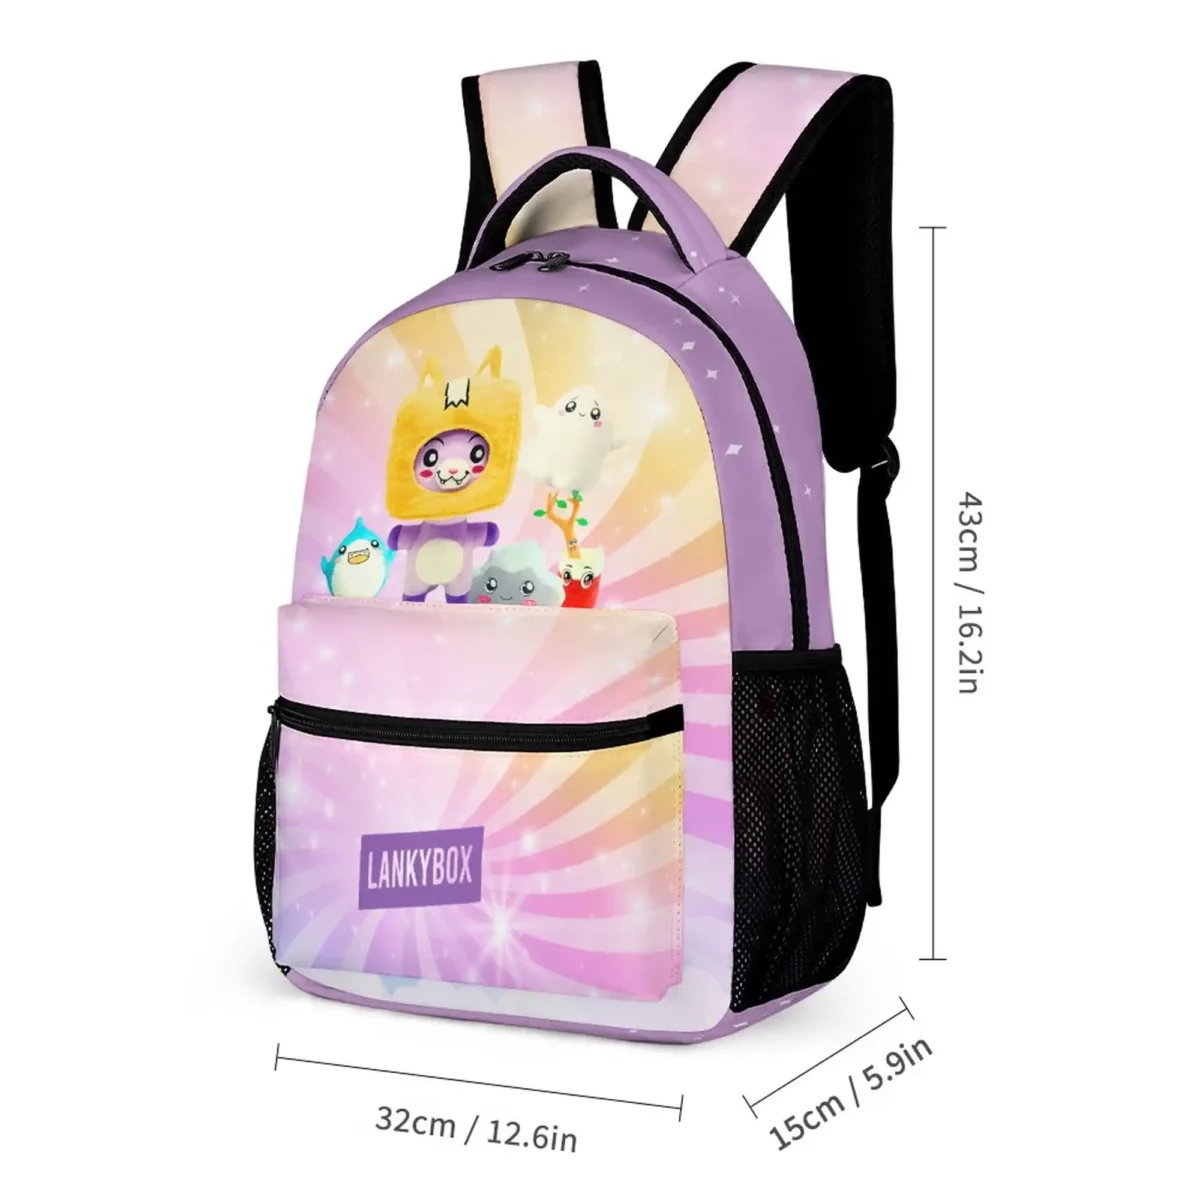 LANKYBOX Three-Piece Set – Book Bag, Lunch Bag, and Pencil Case – Lilac and Yellow Characters Backpack Cool Kiddo 16